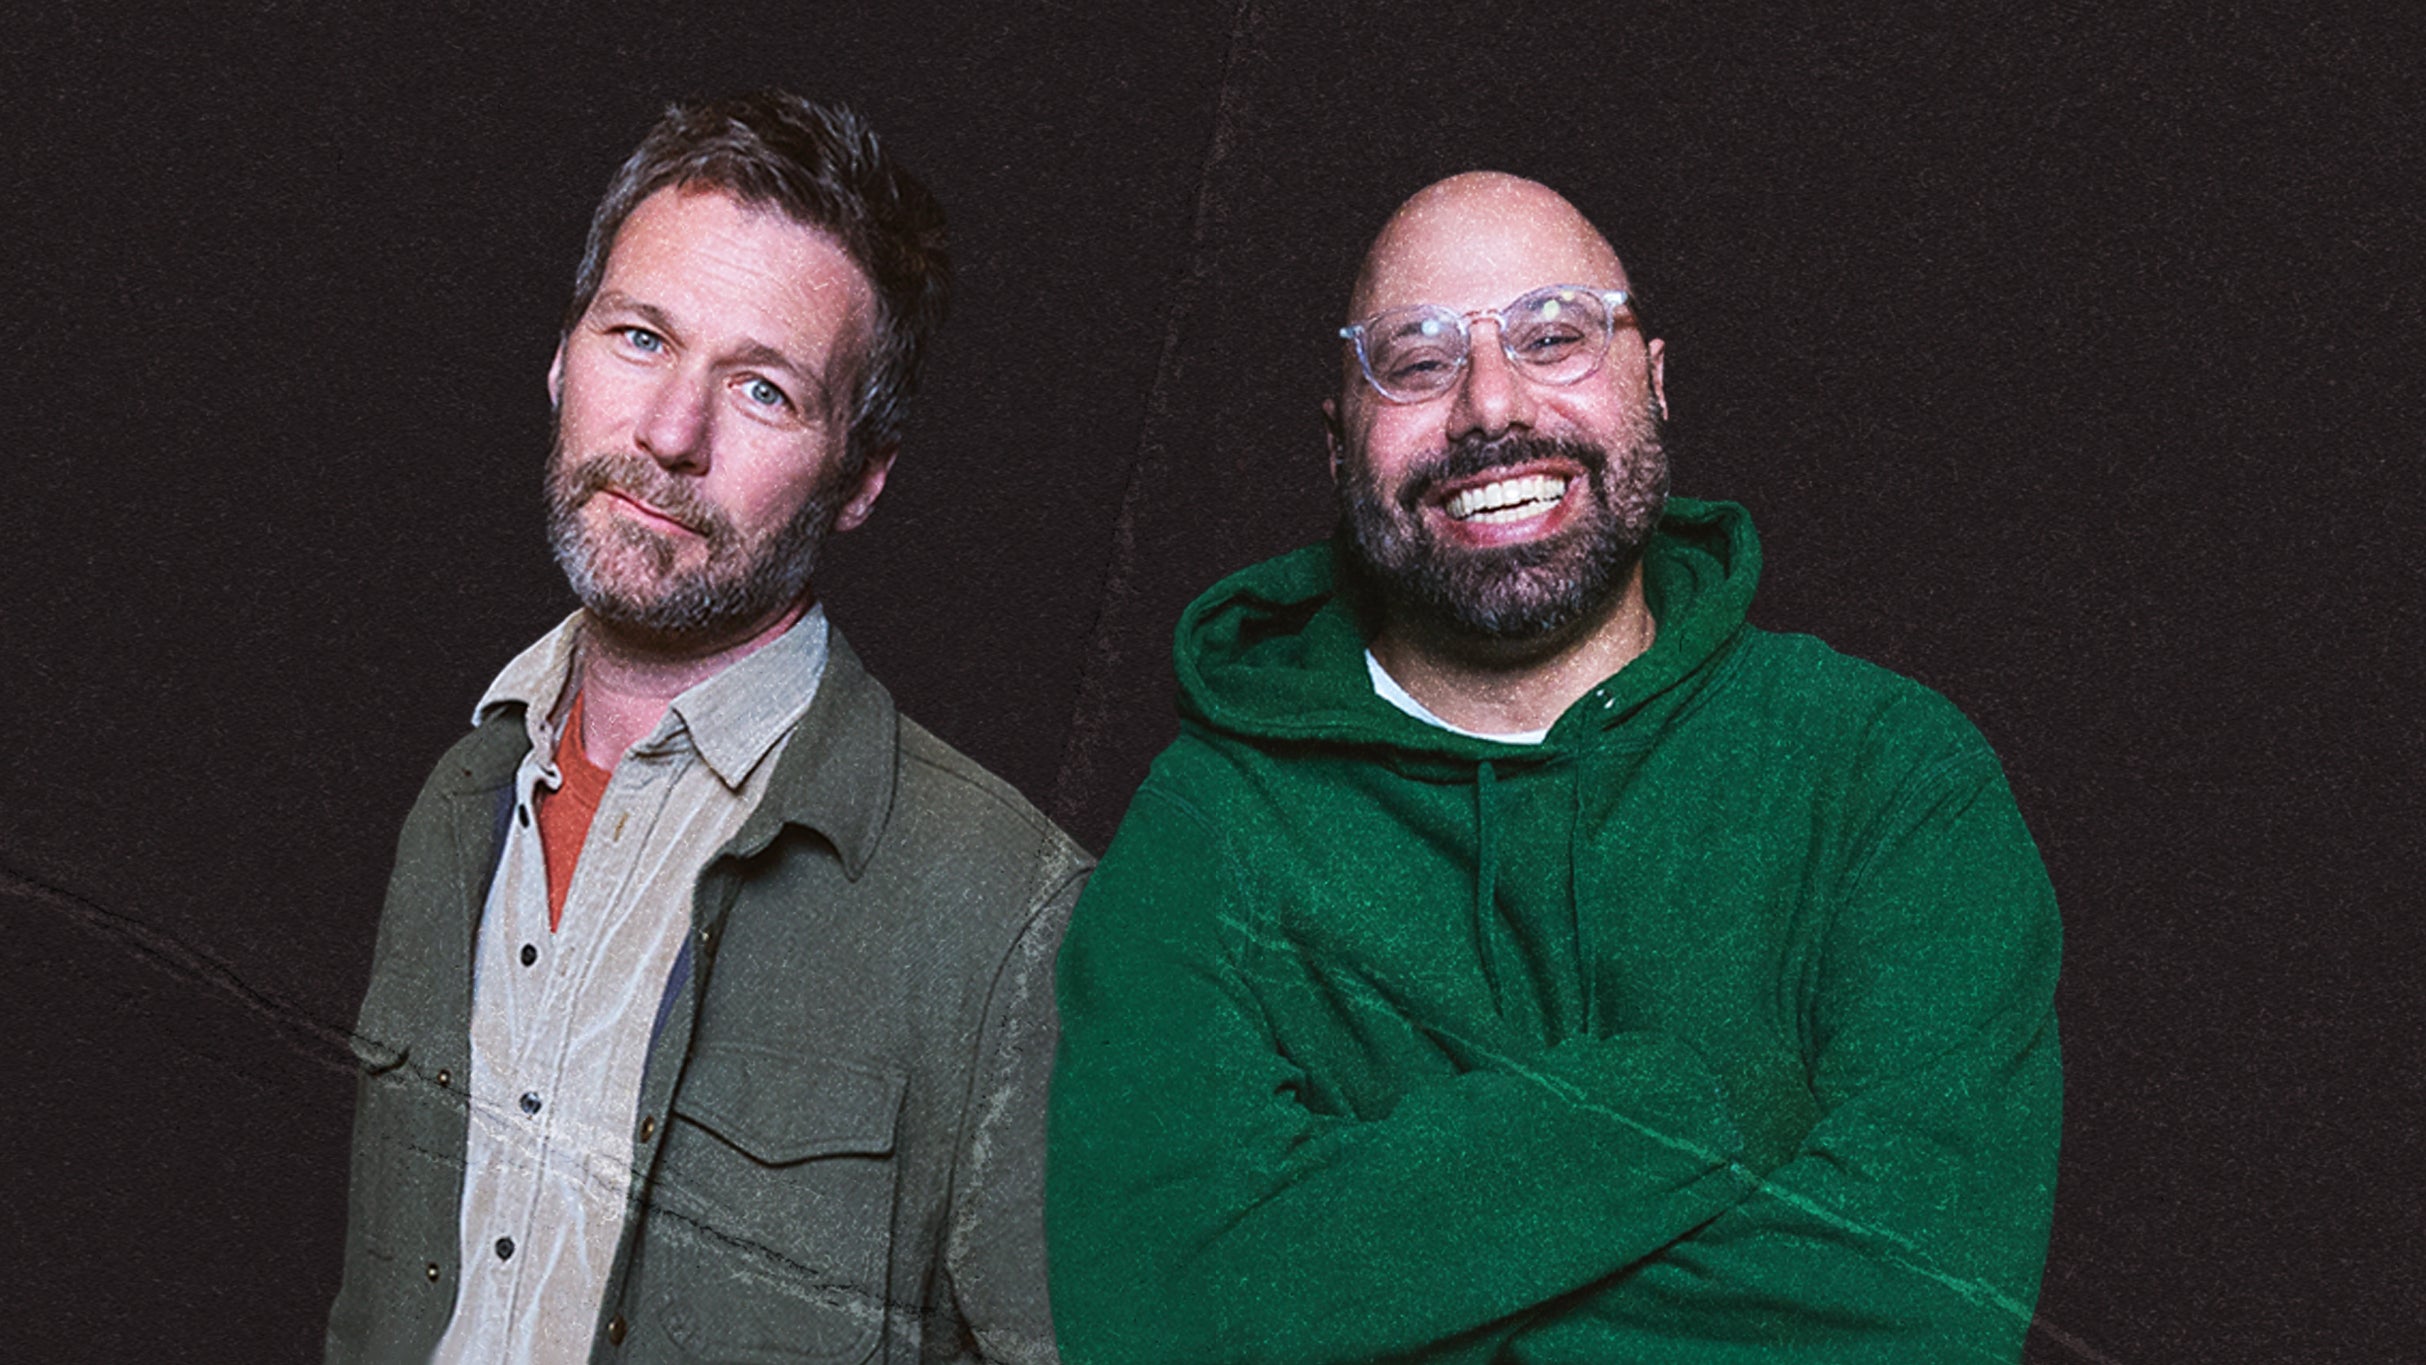 working presale password for Comedy Here Often? & SXM Comedy Club present: Jon Dore & Dave Merheje tickets in Moncton at Molson Canadian Centre at Casino New/Nouveau Brunswick